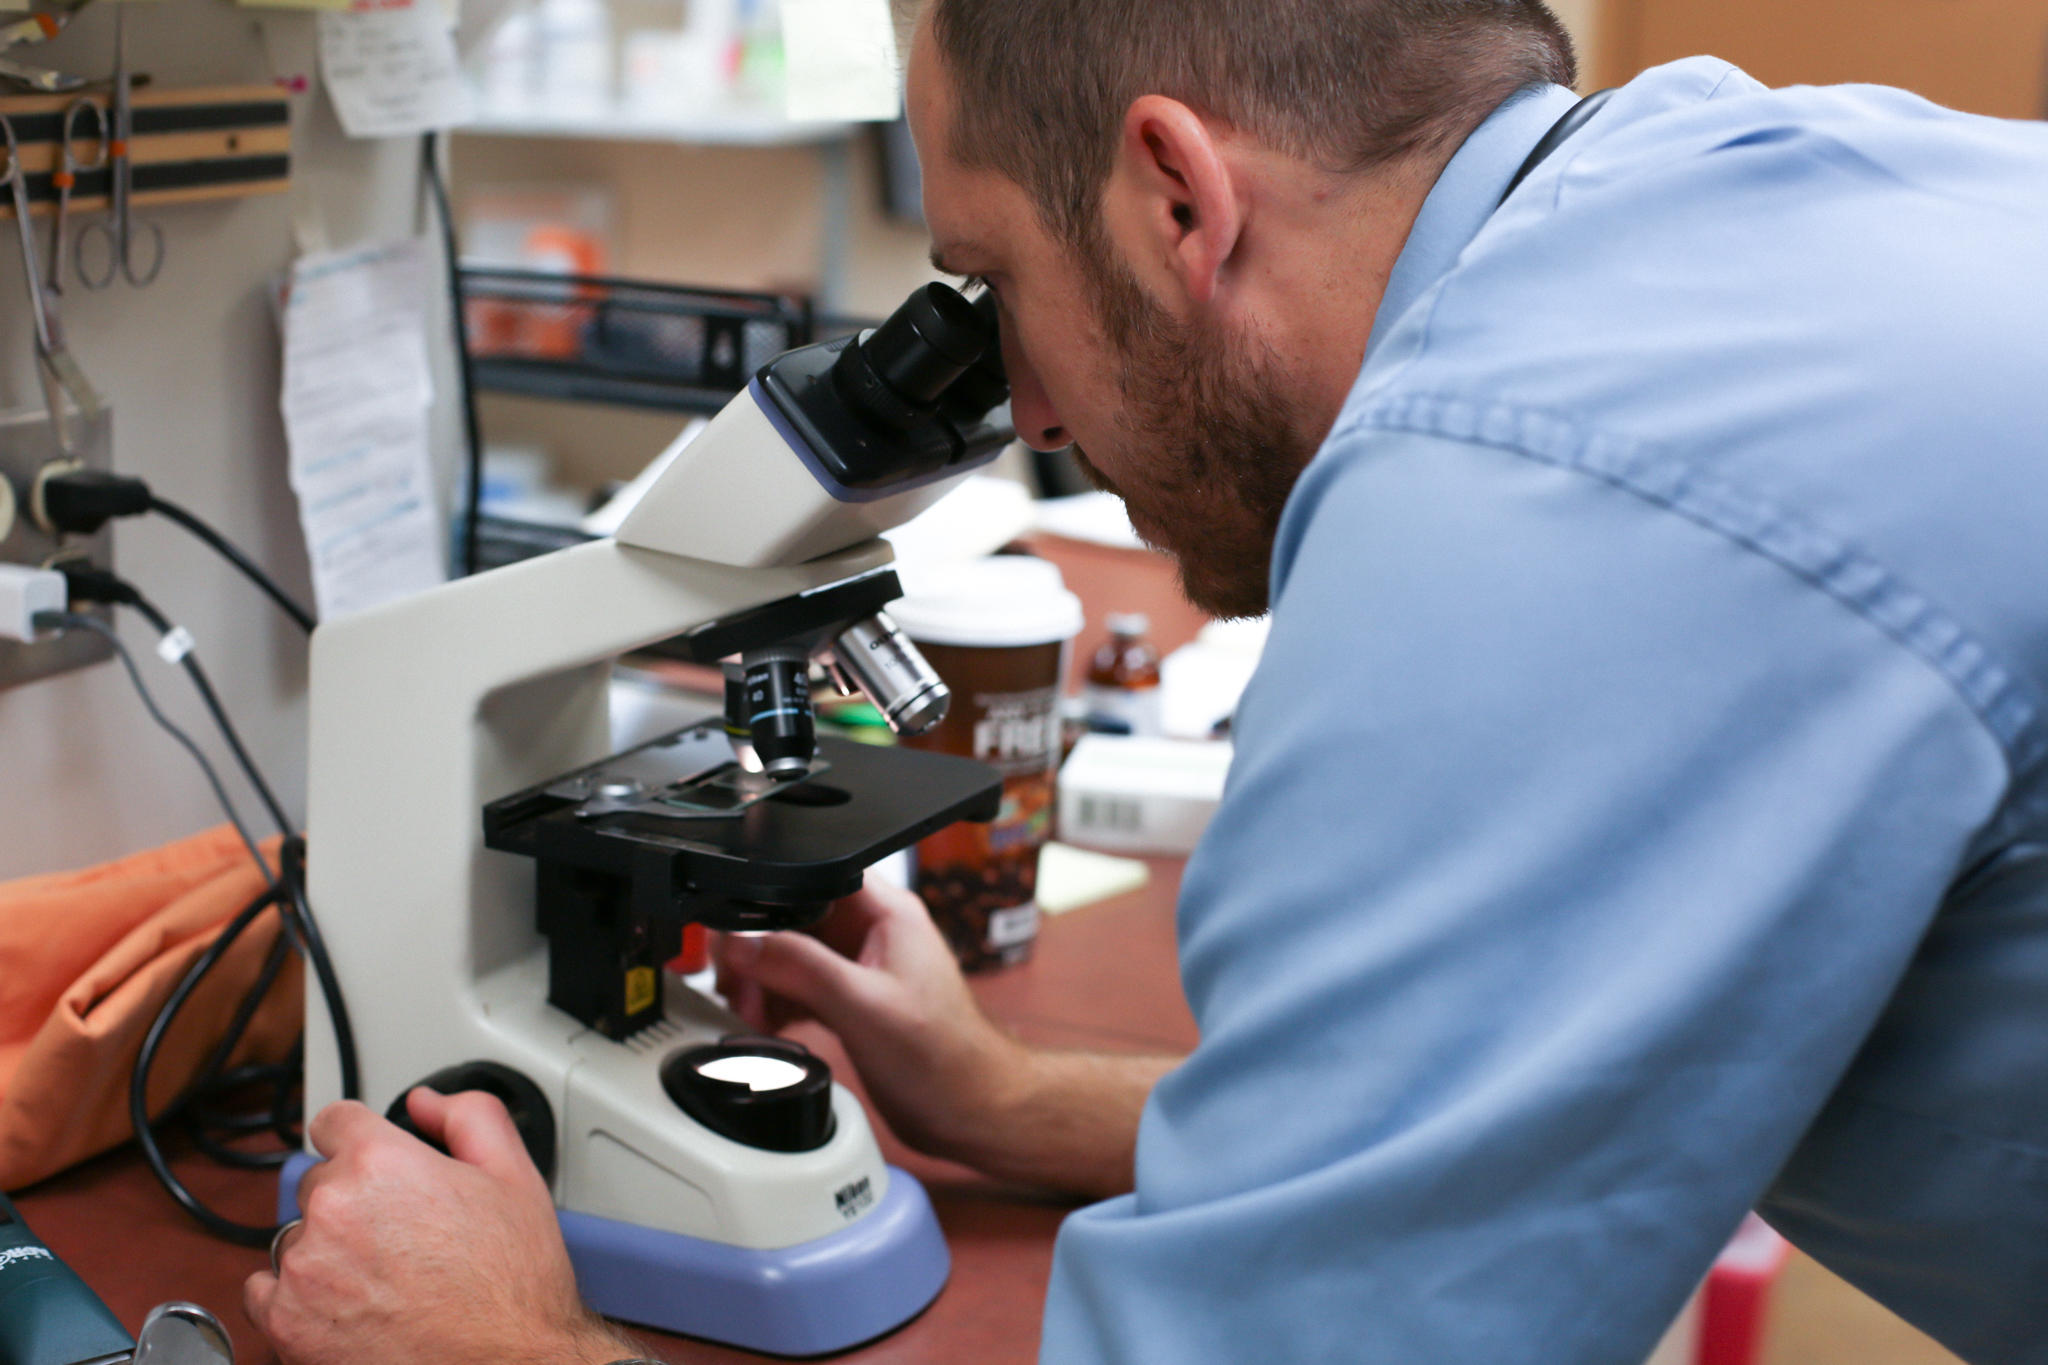 Dr. Thomas Vinson examines a sample using a microscope in our convenient, fully equipped in-house lab. We are able to perform urinalysis, parasite testing, fungal cultures, blood work, and much more.